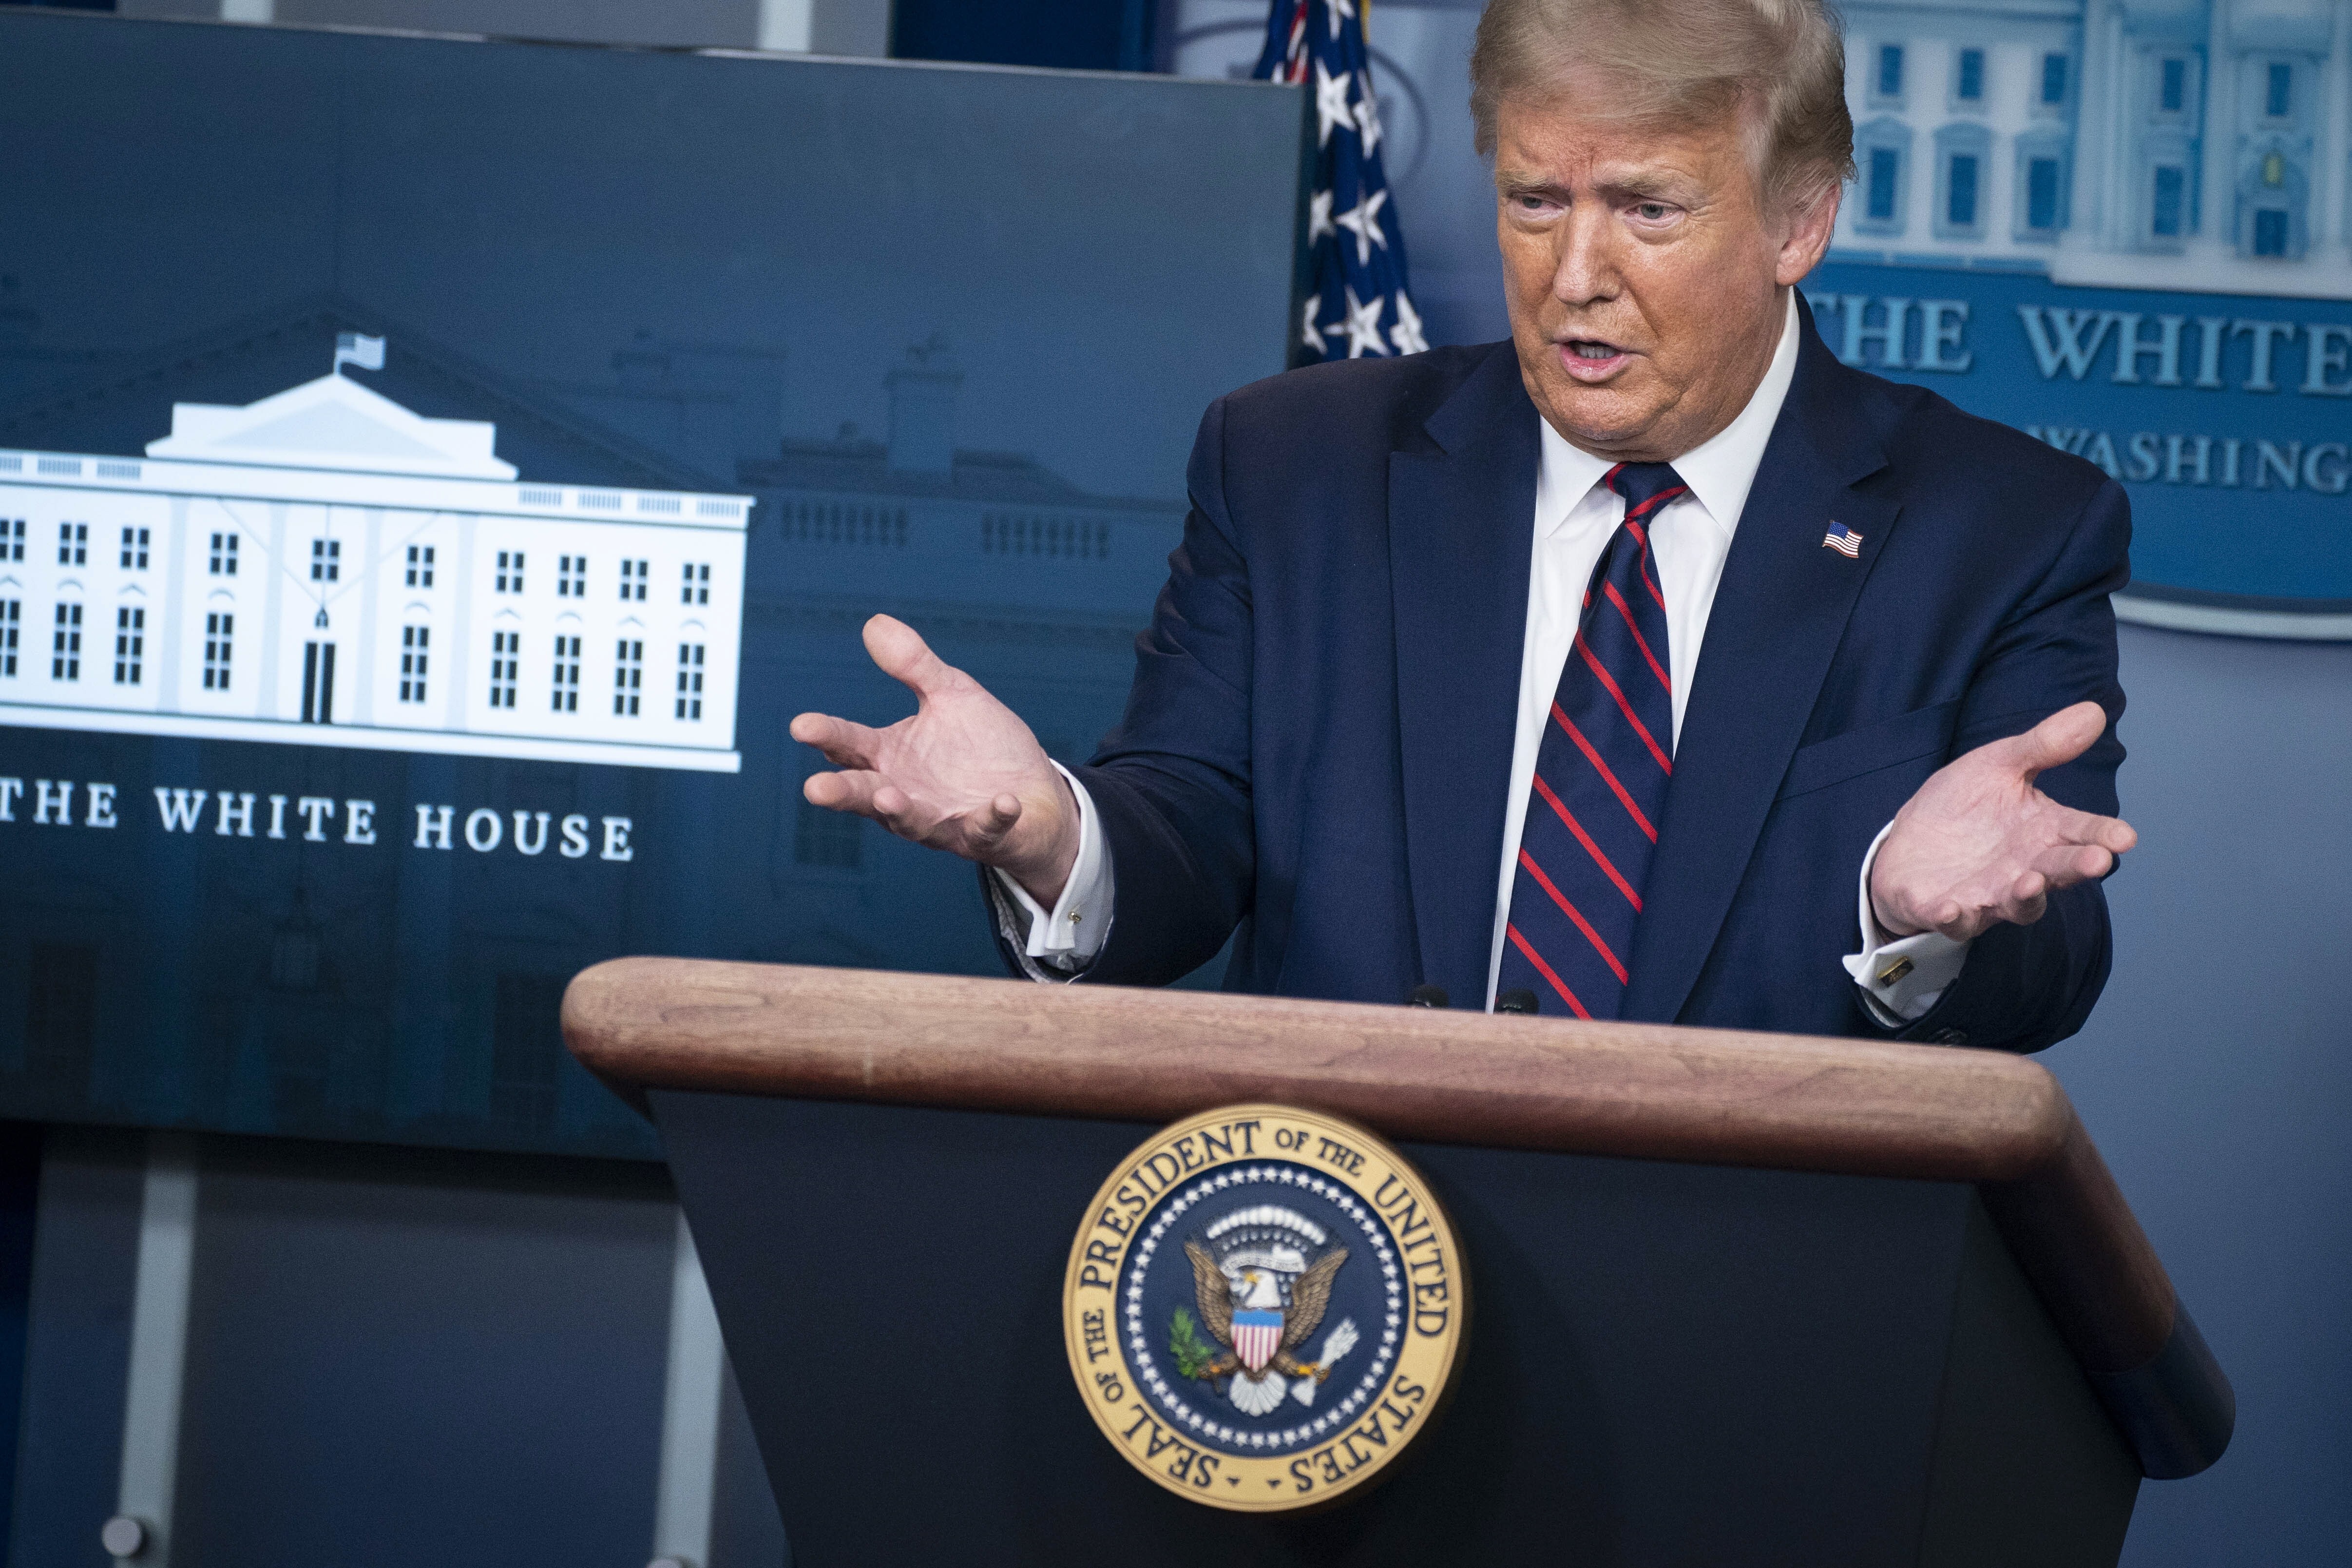 US President Donald Trump speaks during a news conference at the White House on Tuesday. Photo: EPA-EFE